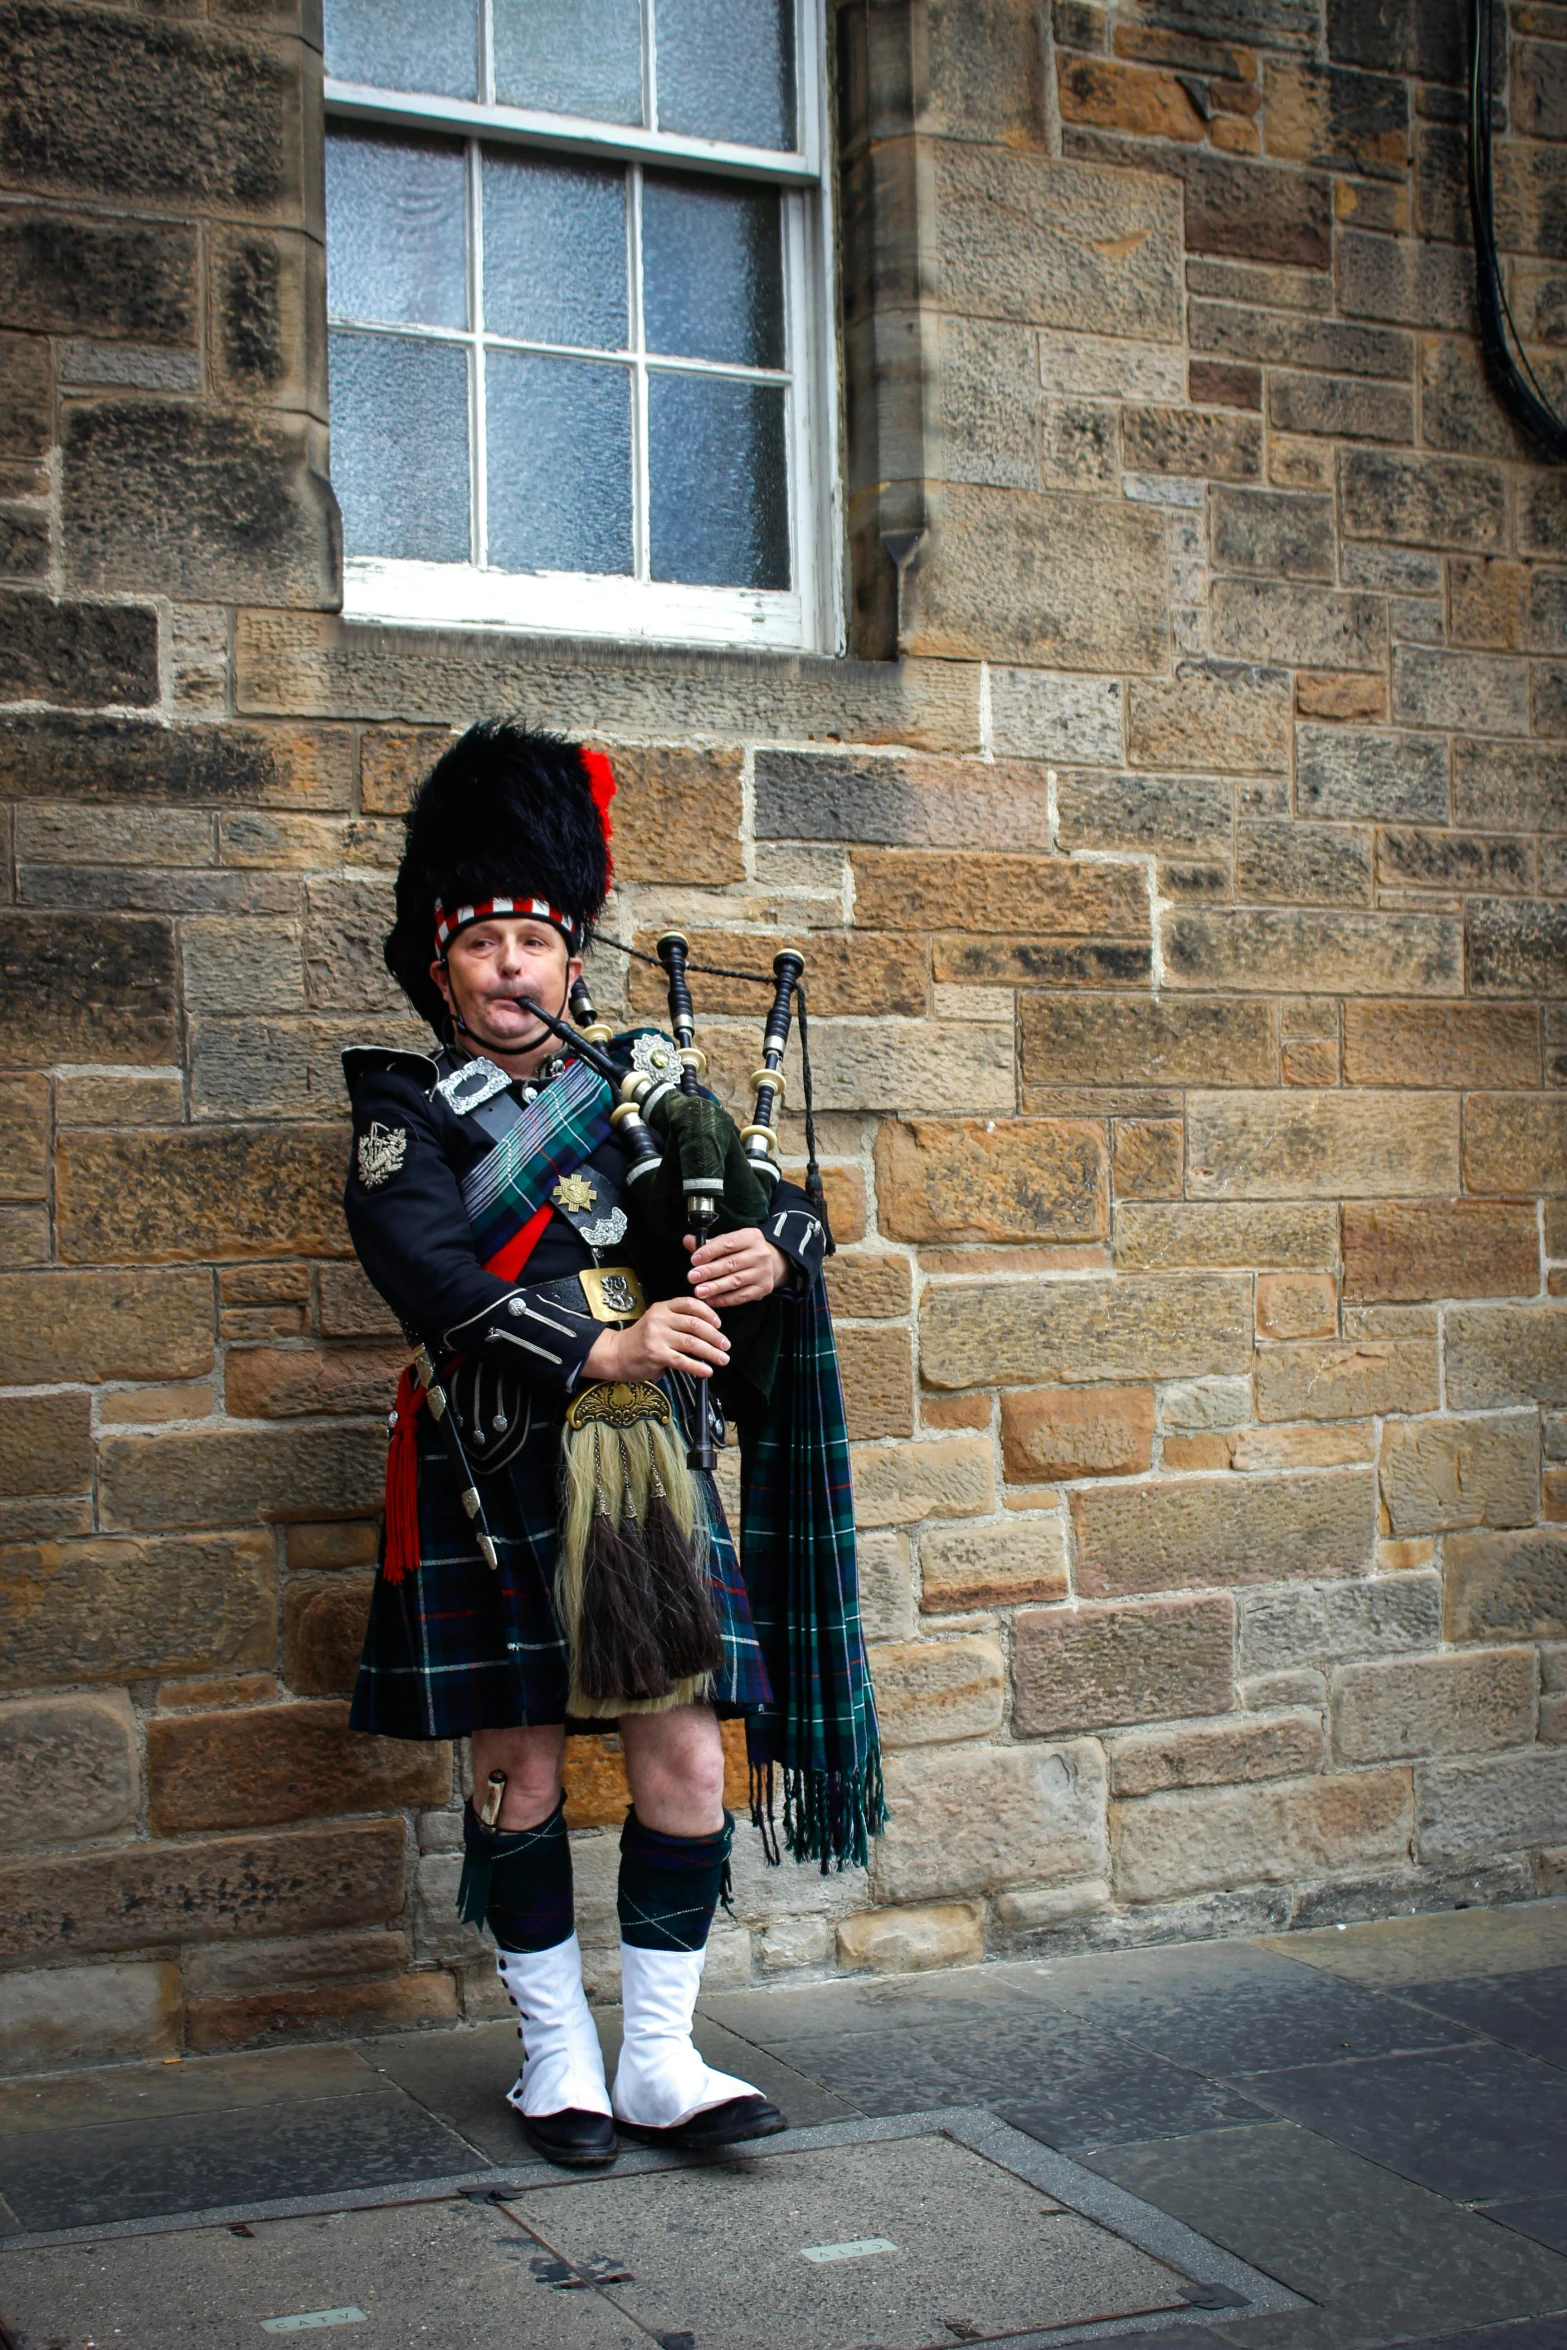 a man with a bagpipe in his hands, standing near a brick building